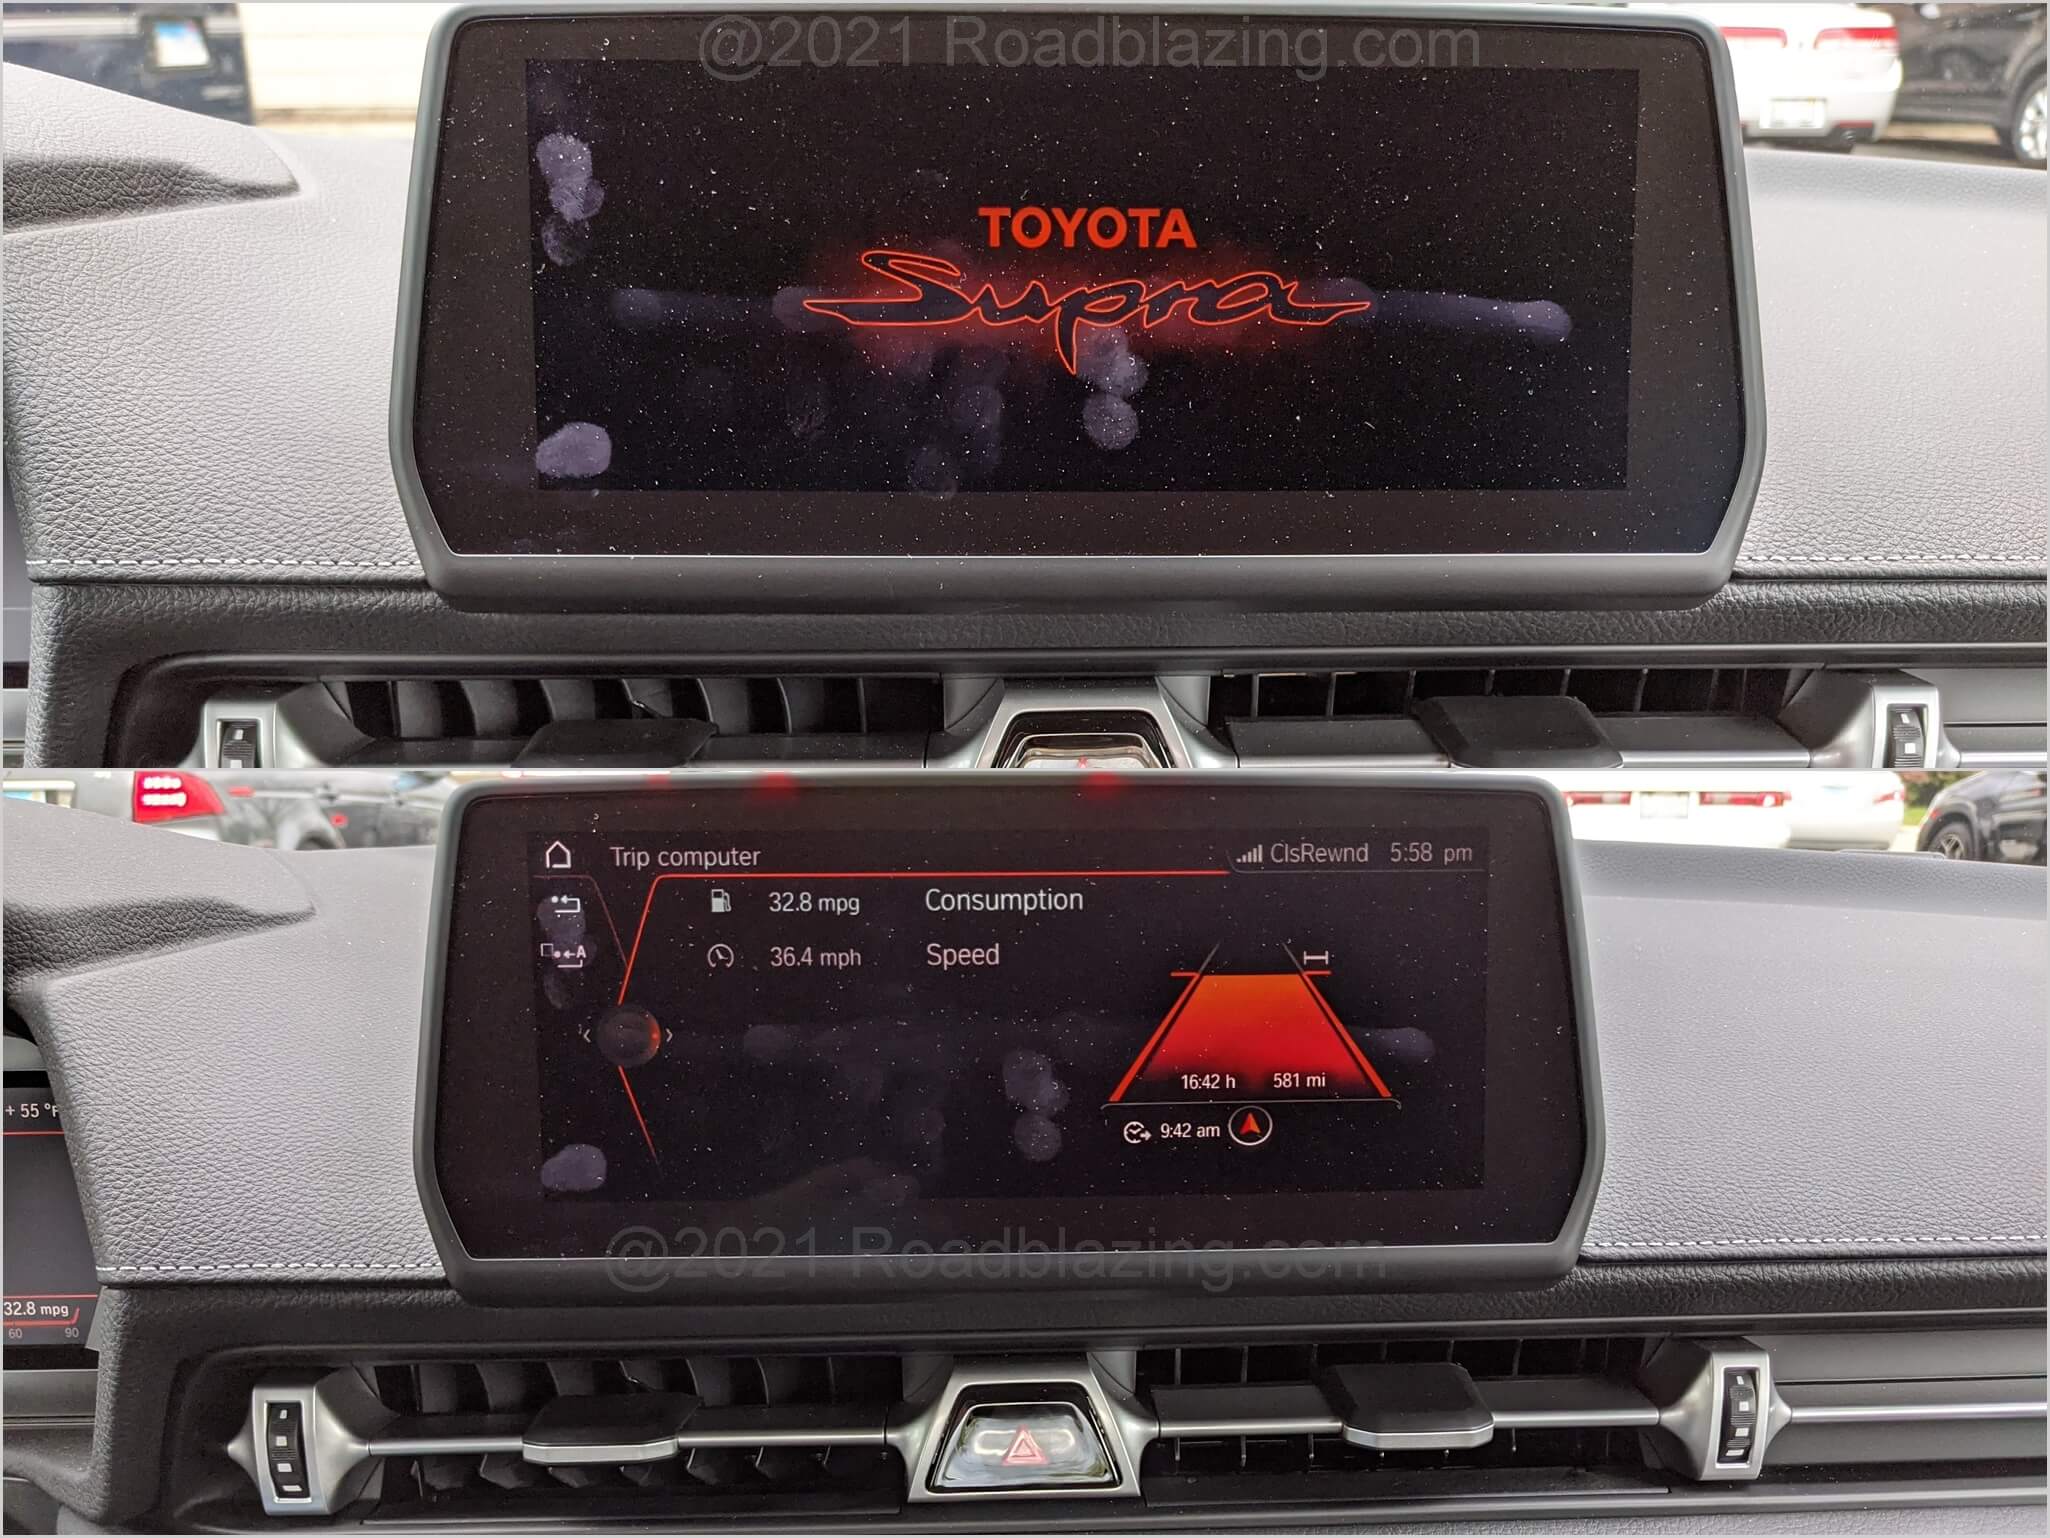 2021 Toyota Supra GR 2.0T: 8.8" touch & remote touch pad rotary dial controlled LCD tri-pane infotainment screen